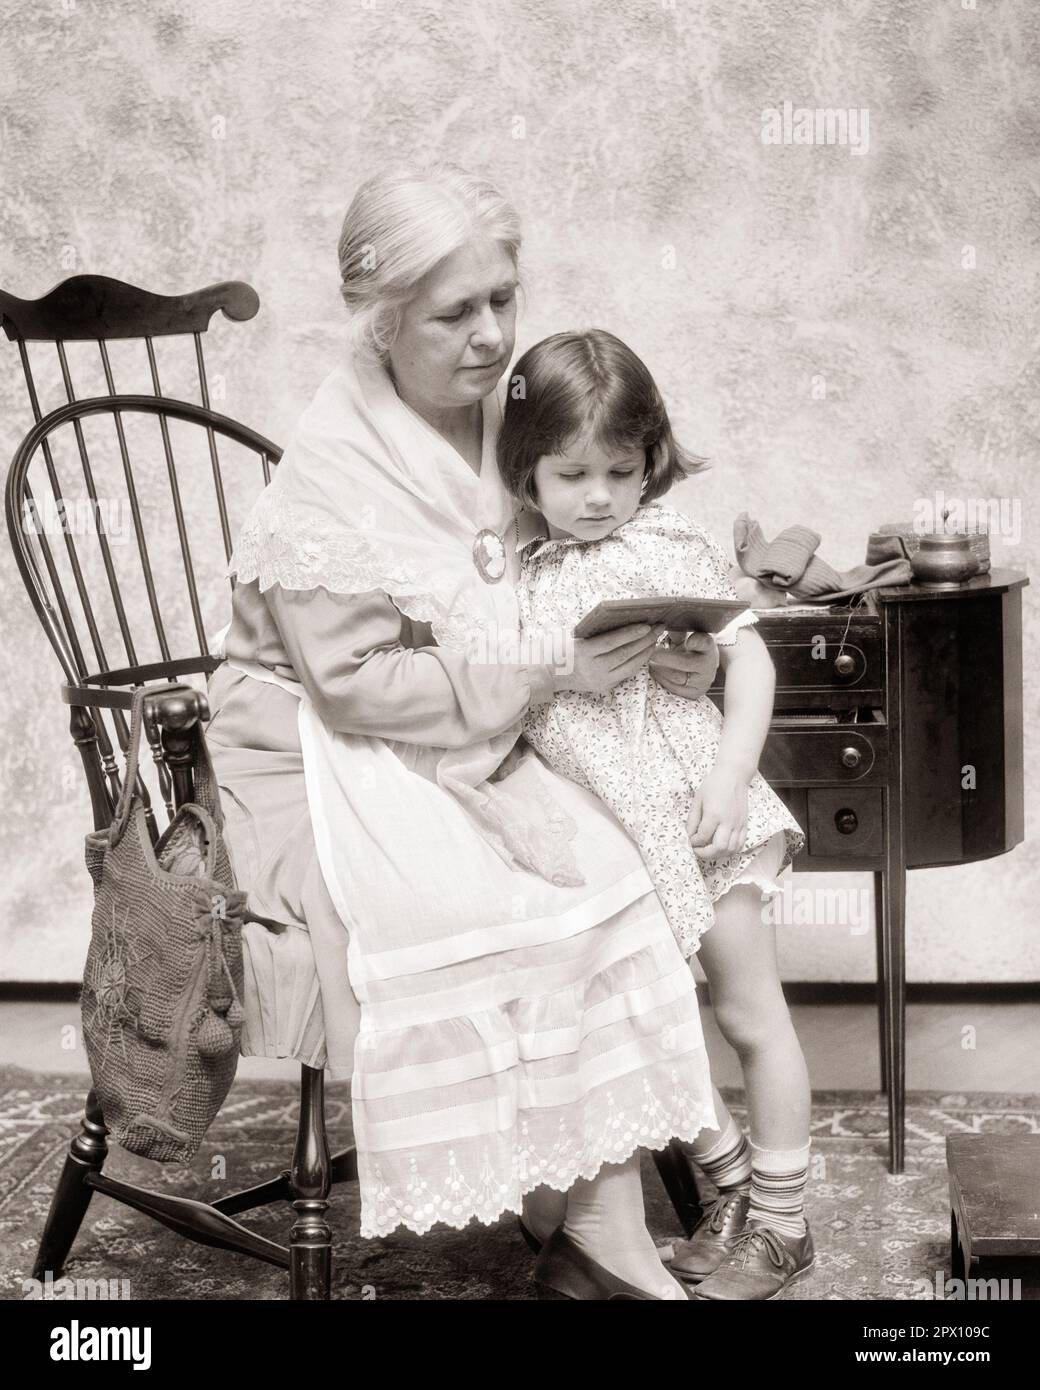 1930s SENIOR GRANDMOTHER SITTING IN WINDSOR CHAIR BY SEWING TABLE READING FROM SMALL BOOK TO HER LITTLE GRANDDAUGHTER - m2349 HAR001 HARS JUVENILE COMMUNICATION GENERATIONS EMBRACE STRONG GRANDPARENTS FAMILIES JOY LIFESTYLE FEMALES GRANDPARENT STUDIO SHOT HOME LIFE COPY SPACE FRIENDSHIP HALF-LENGTH HUG LADIES PERSONS INSPIRATION CARING EMBRACING SENIOR ADULT B&W SENIOR WOMAN QUALITY TIME YOUNG AND OLD GENERATION GRANDMOTHERS CONNECTION GRANDDAUGHTER STYLISH PERSONAL ATTACHMENT WINDSOR AFFECTION AGE DIFFERENCE ELDERLY WOMAN EMOTION GROWTH JUVENILES TOGETHERNESS BLACK AND WHITE Stock Photo